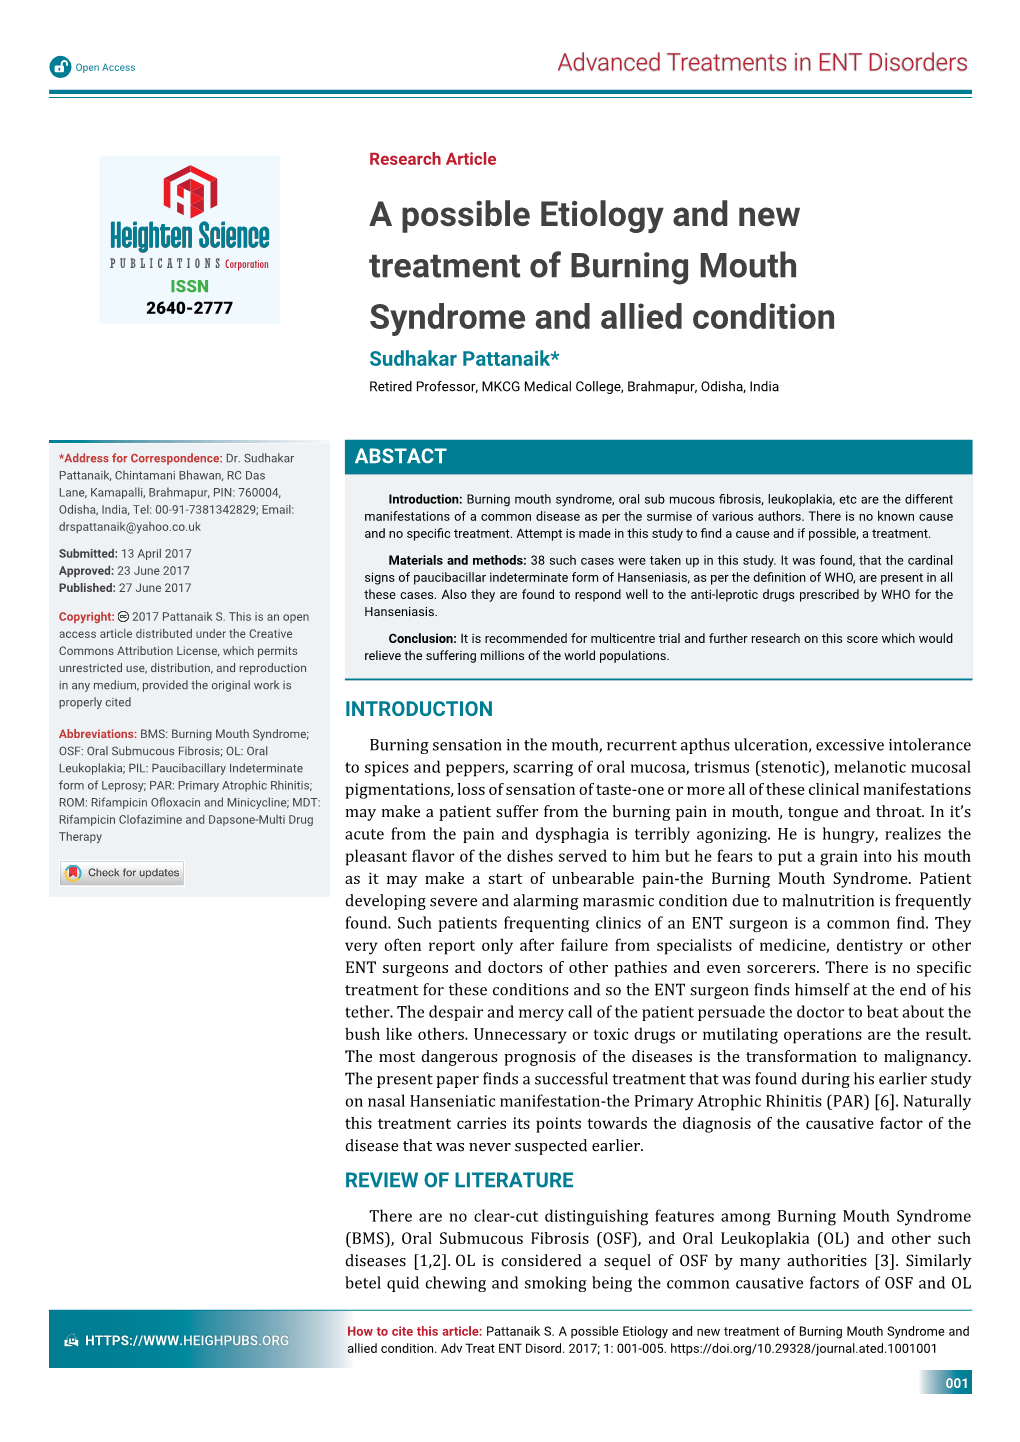 A Possible Etiology and New Treatment of Burning Mouth Syndrome and Allied Condition